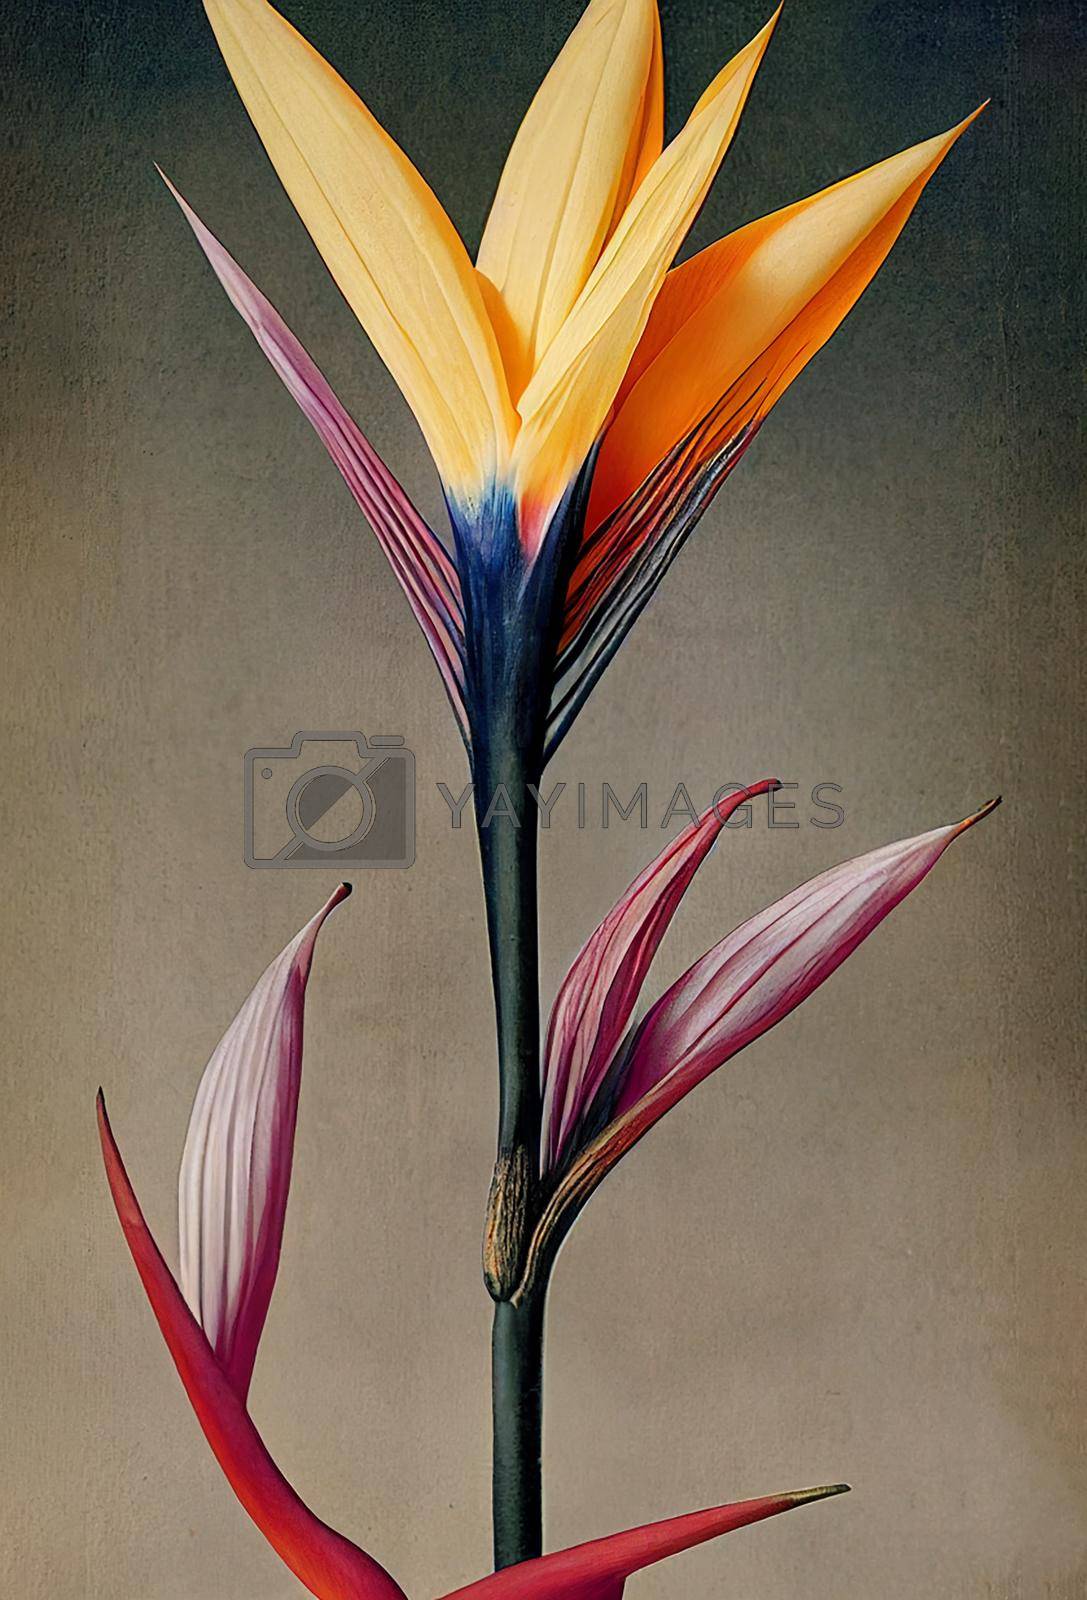 Royalty free image of Artistic Illustration Of The Colorful Bird Of Paradise Flower by 	JacksonStock